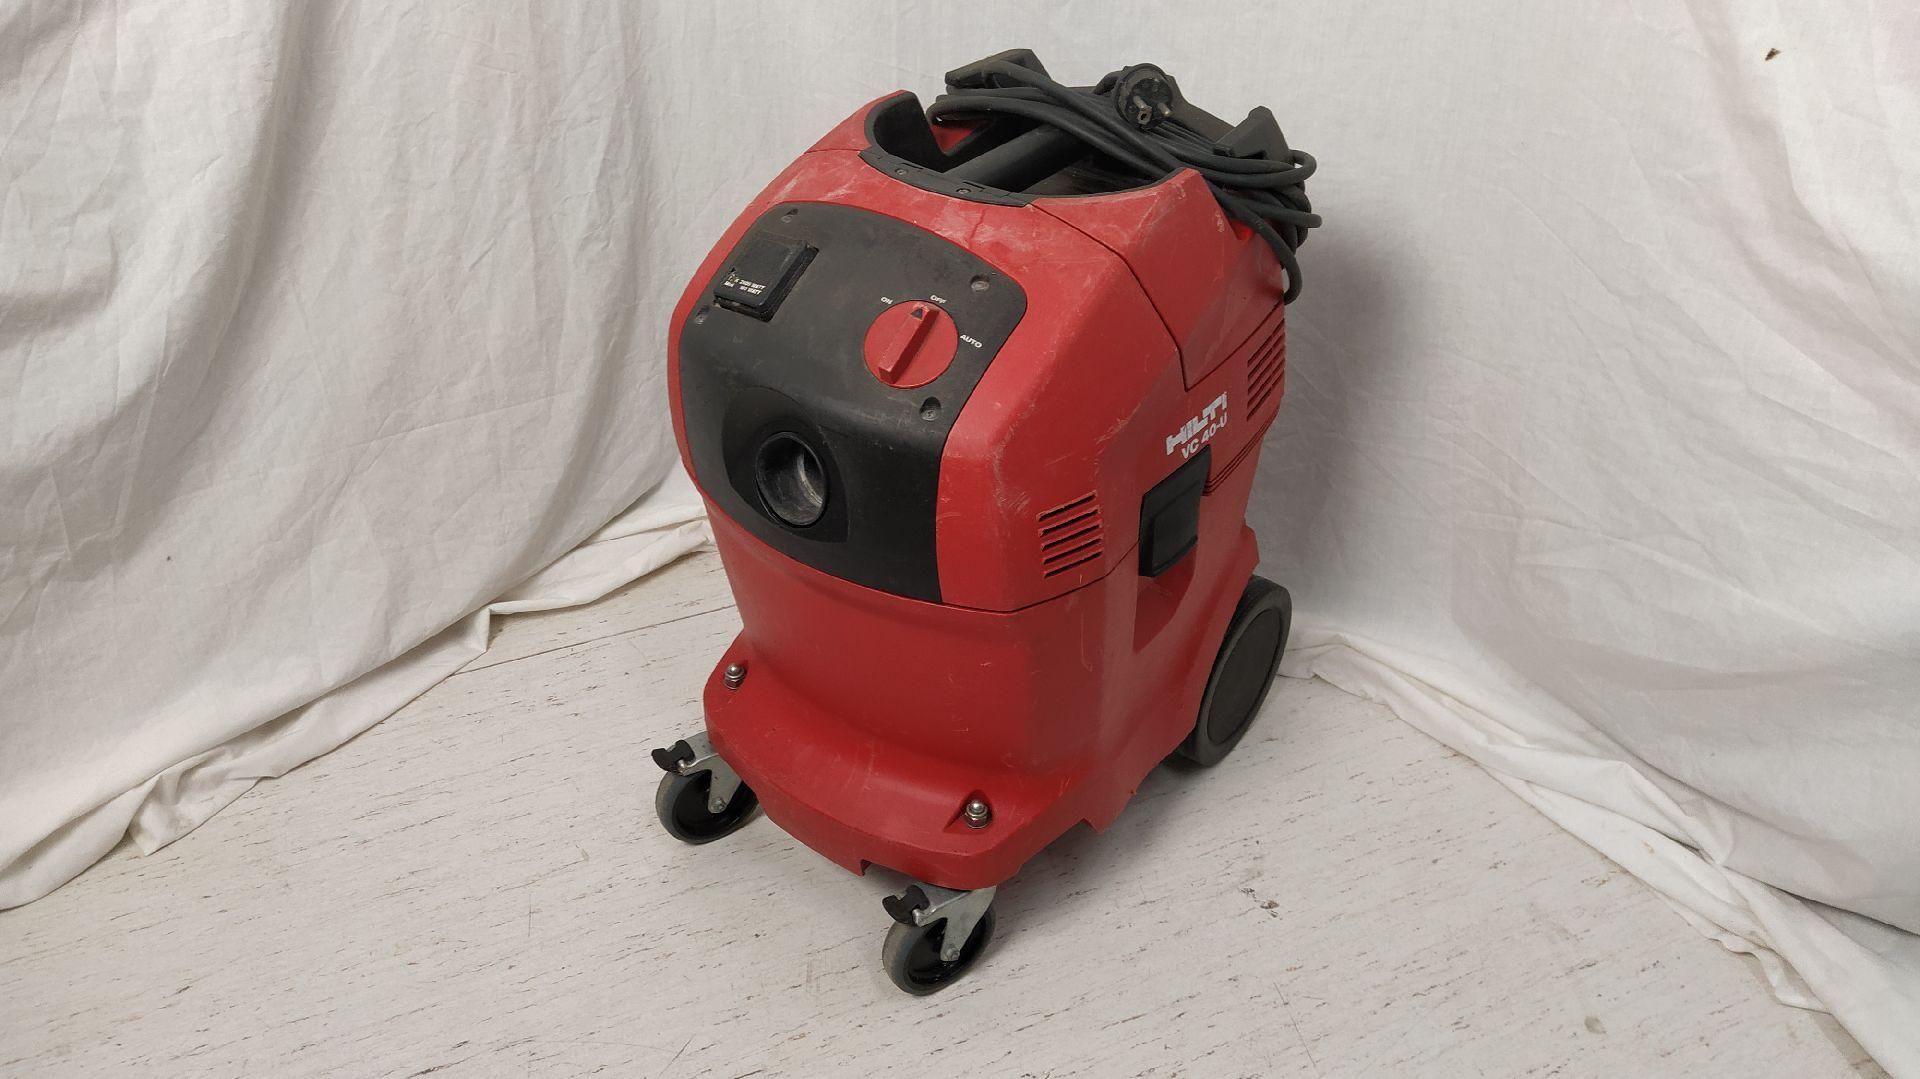 Null Vacuum cleaner HILTI VC 40-U, without accessory
Untested material, sold as &hellip;